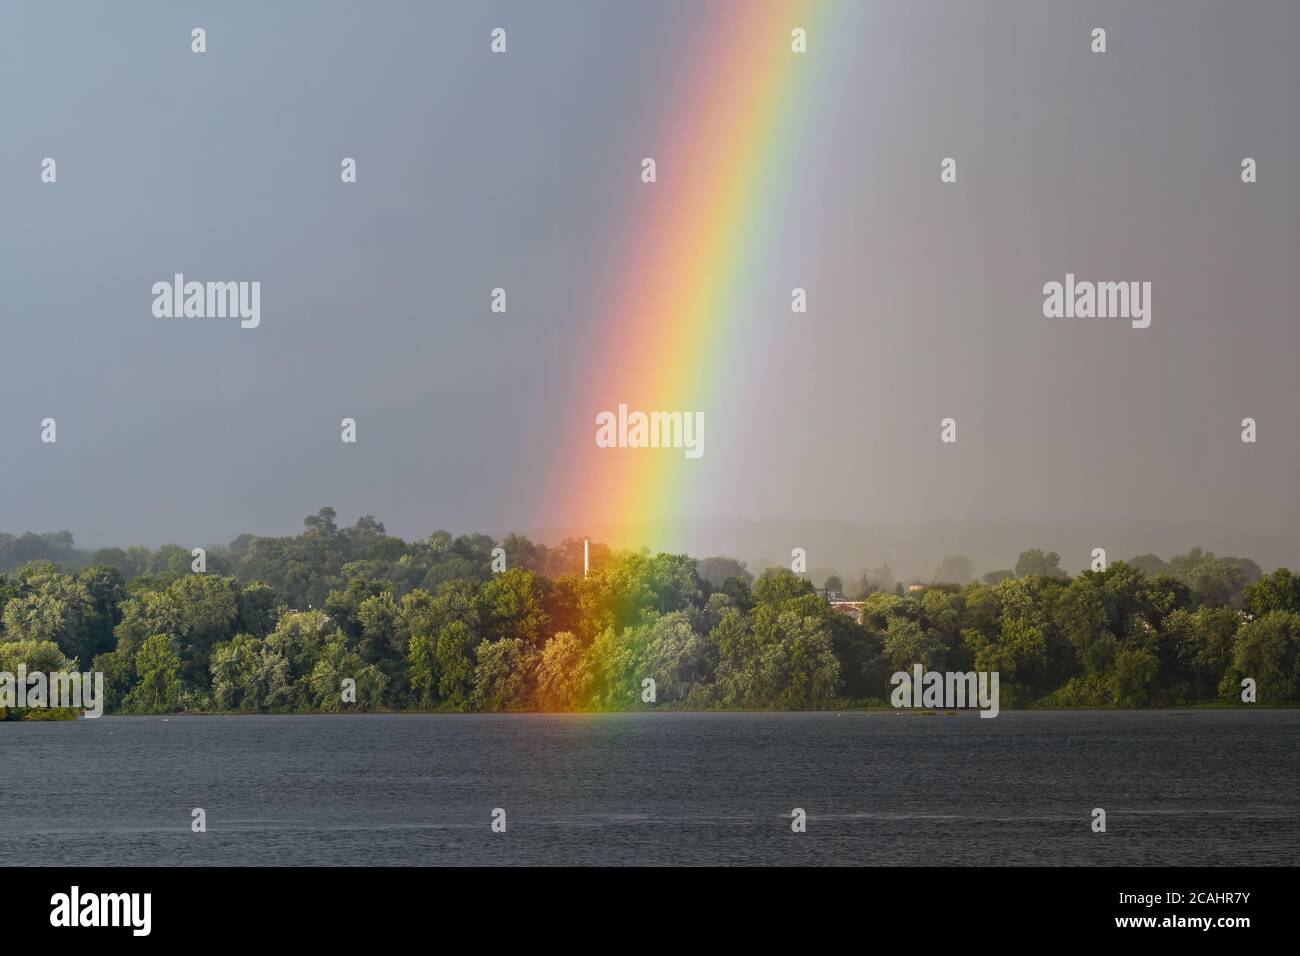 The end of a rainbow during a storm over the Susquehanna River in northeastern USA. Stock Photo